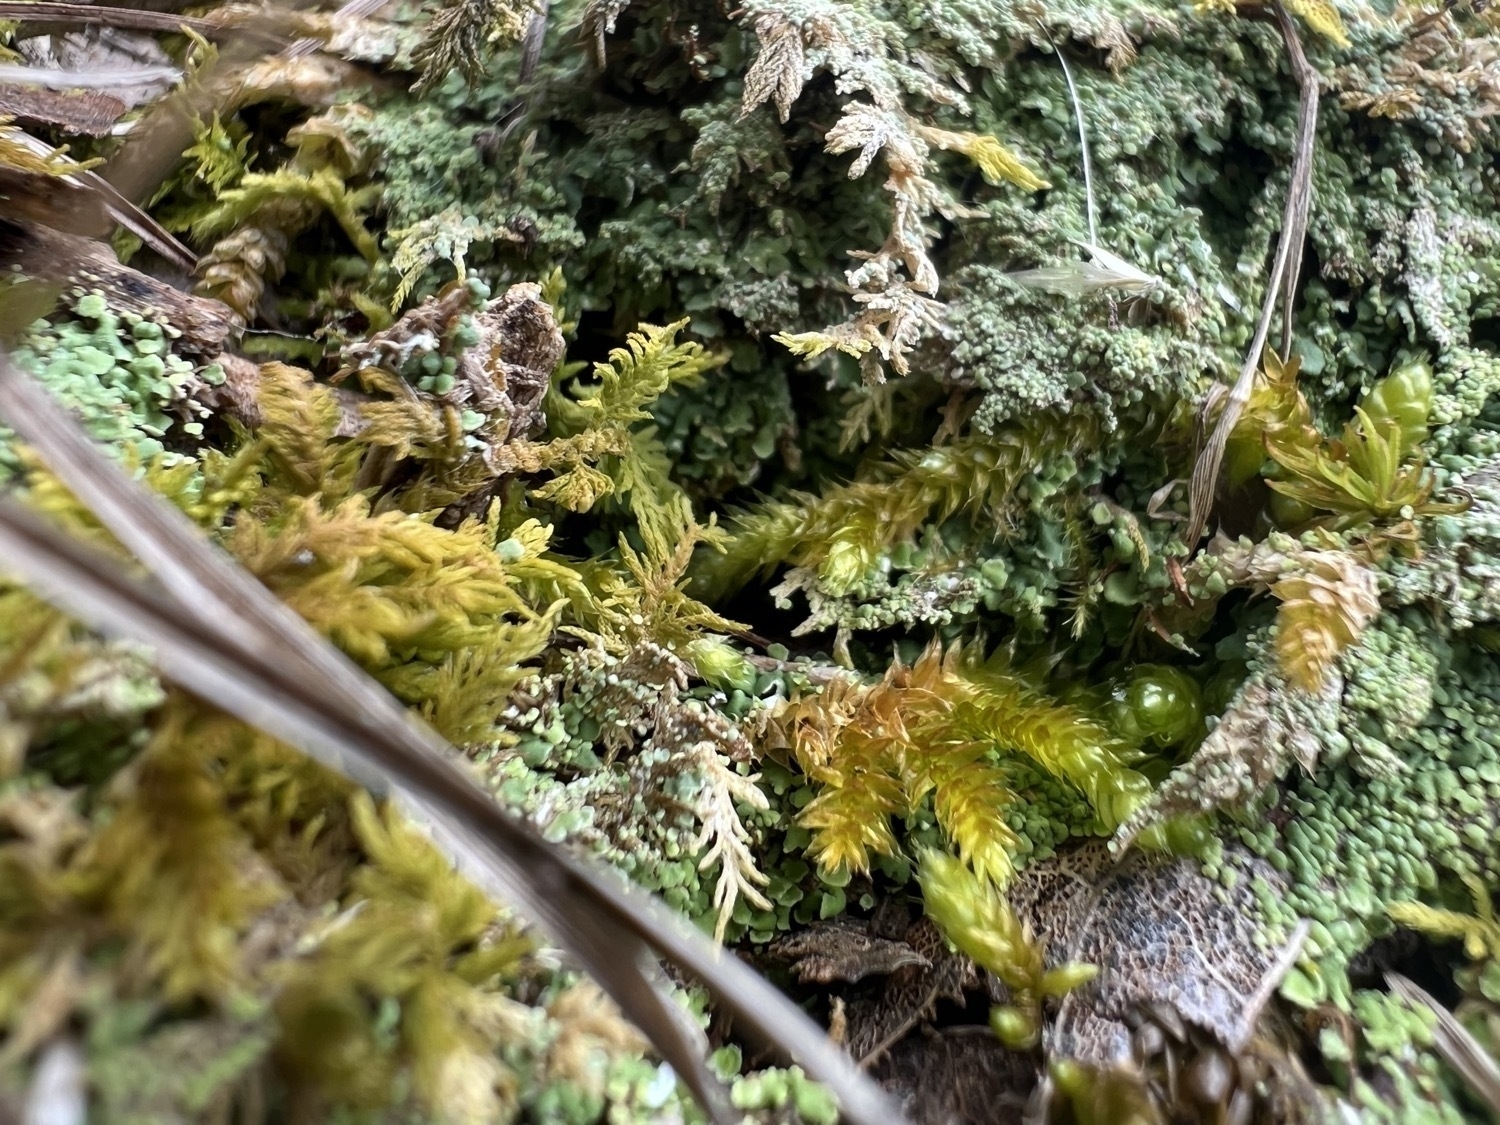 A patch of moss and lichen, the lichen seems to be covering the moss, growing over it